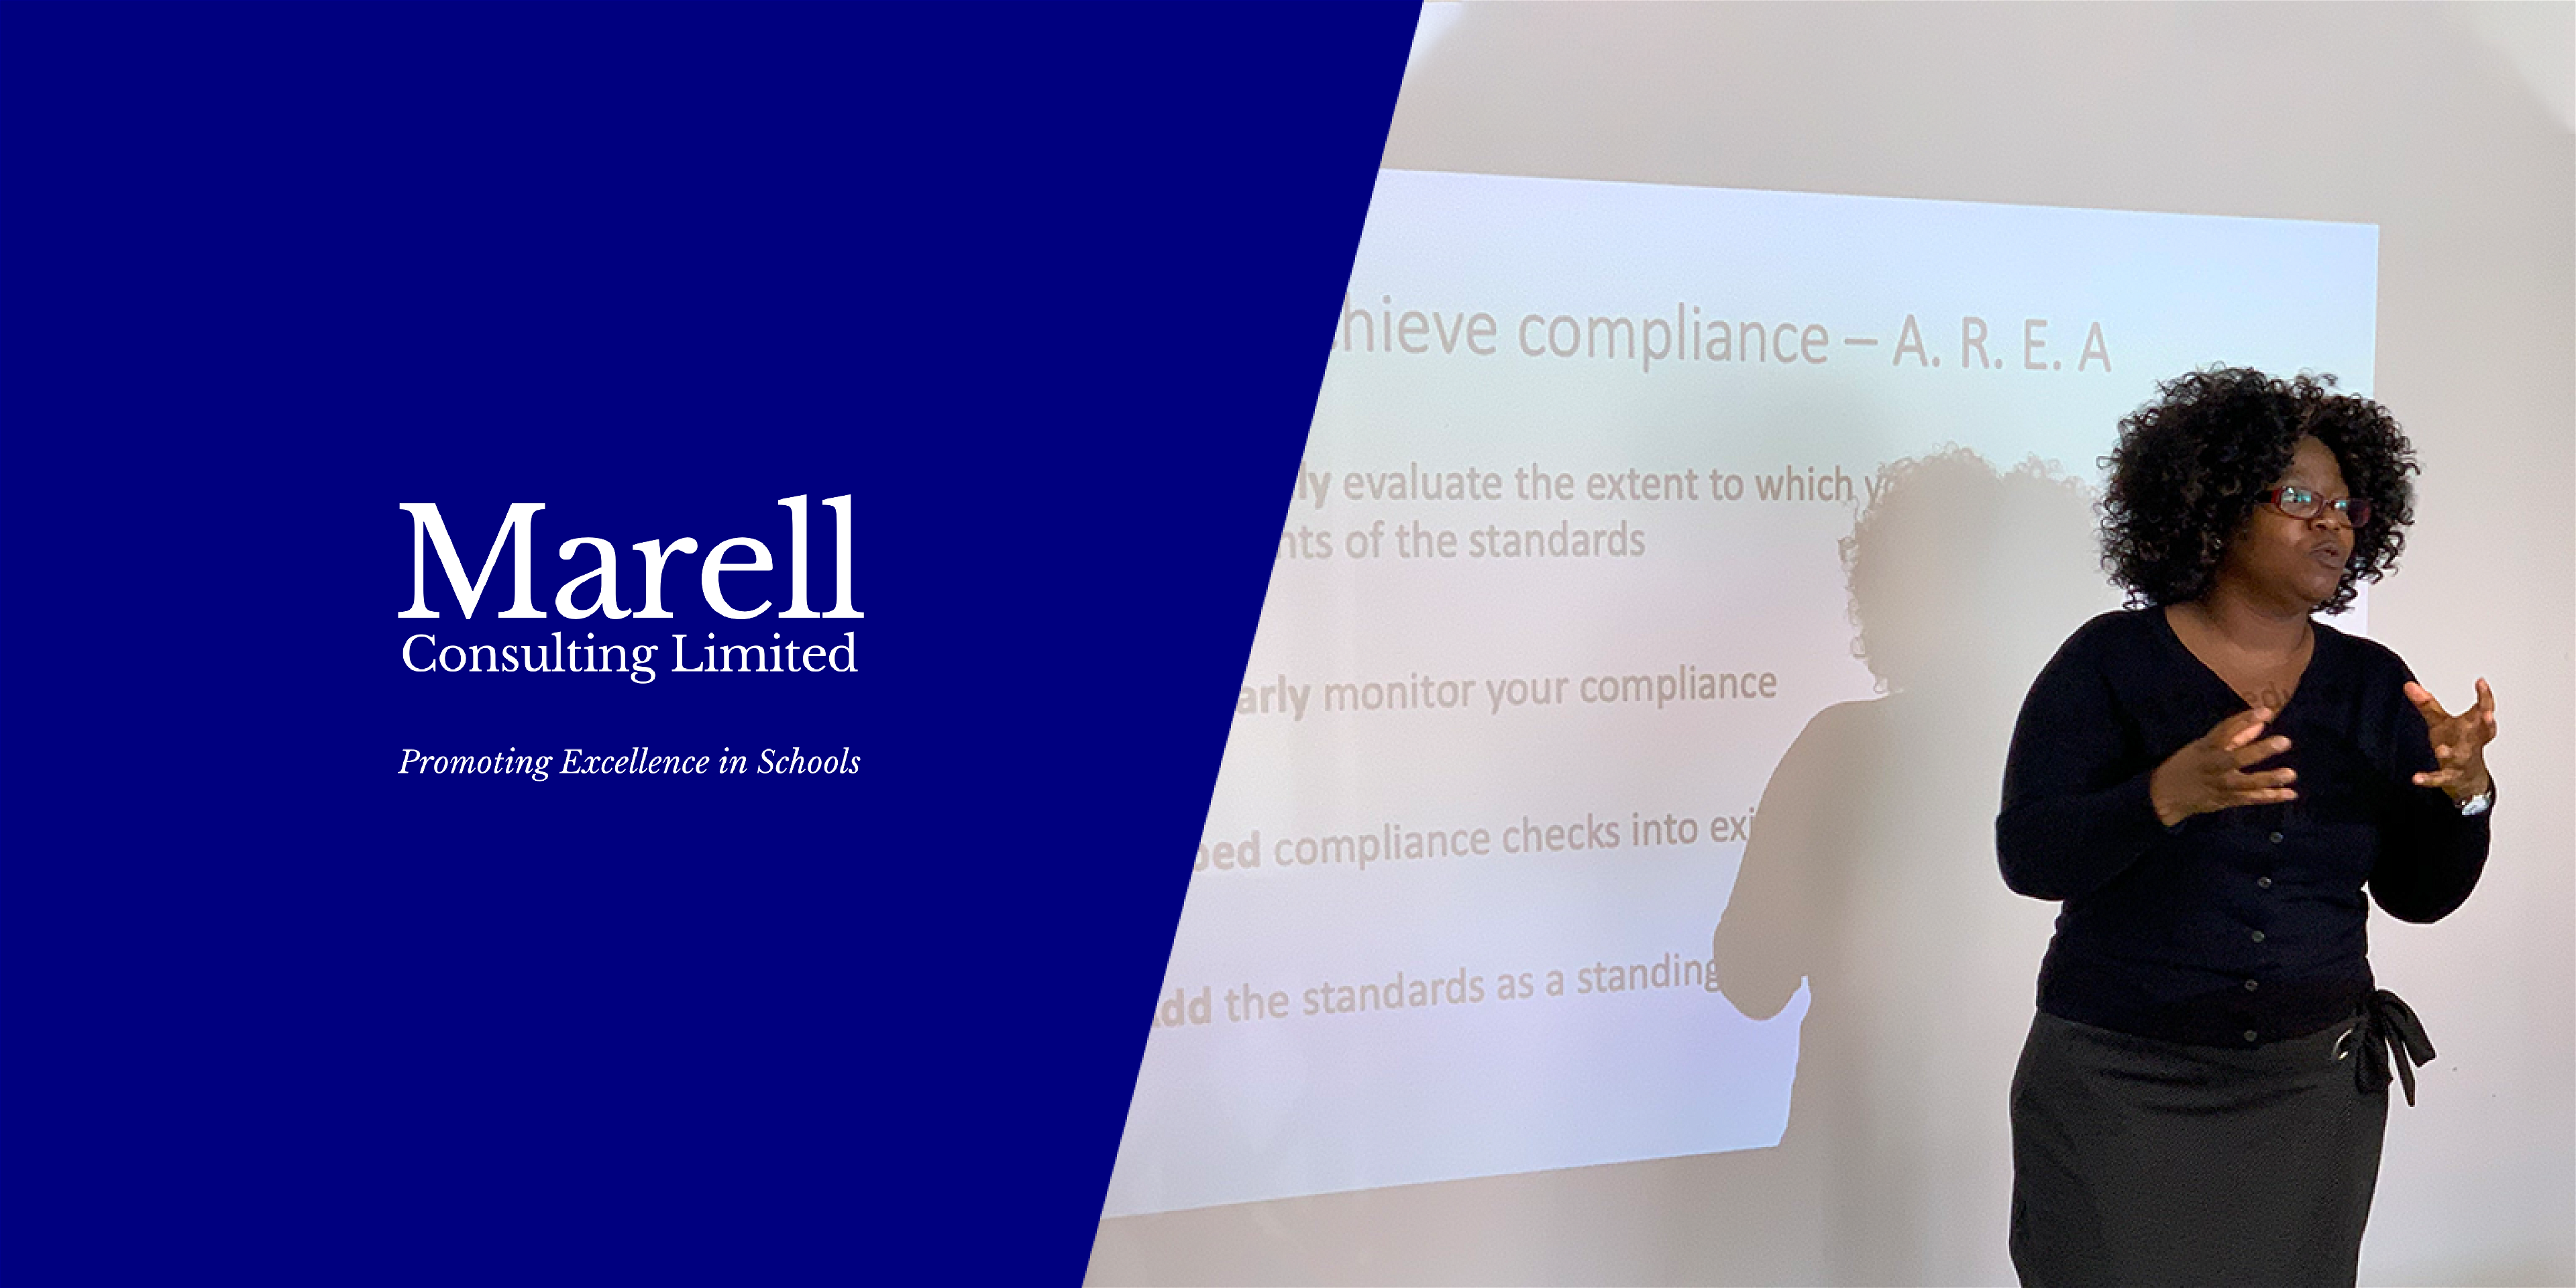 Marell Consulting Limited